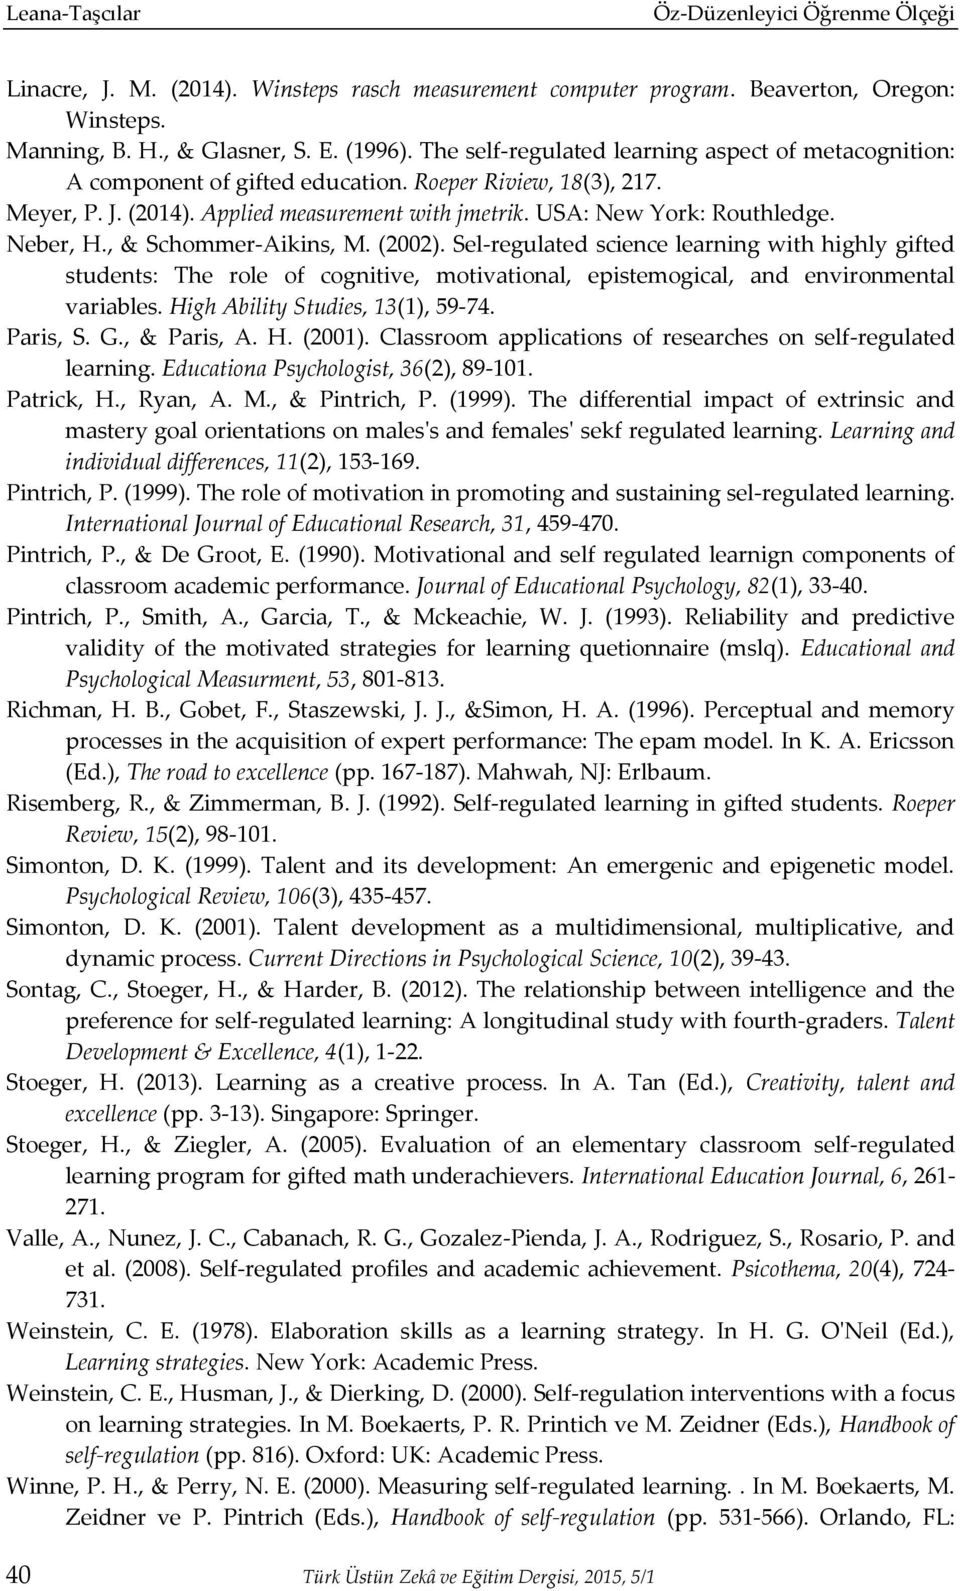 Neber, H., & Schommer-Aikins, M. (2002). Sel-regulated science learning with highly gifted students: The role of cognitive, motivational, epistemogical, and environmental variables.